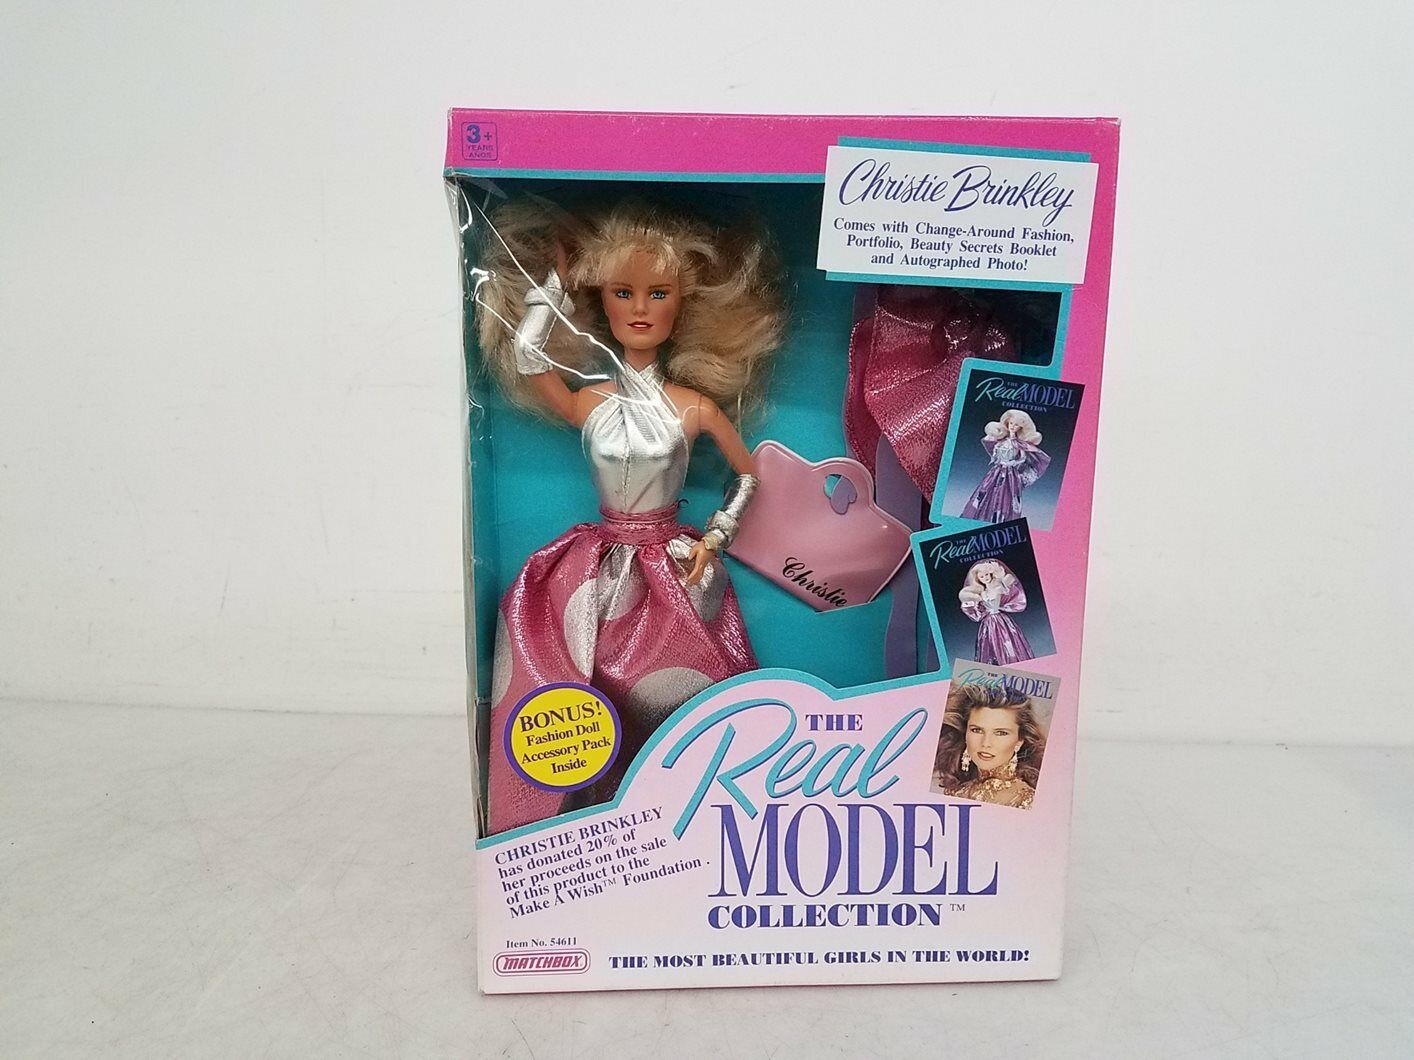 Christie Brinkley Doll The Real Model Collection 1989 Matchbox 54611 for sale online 